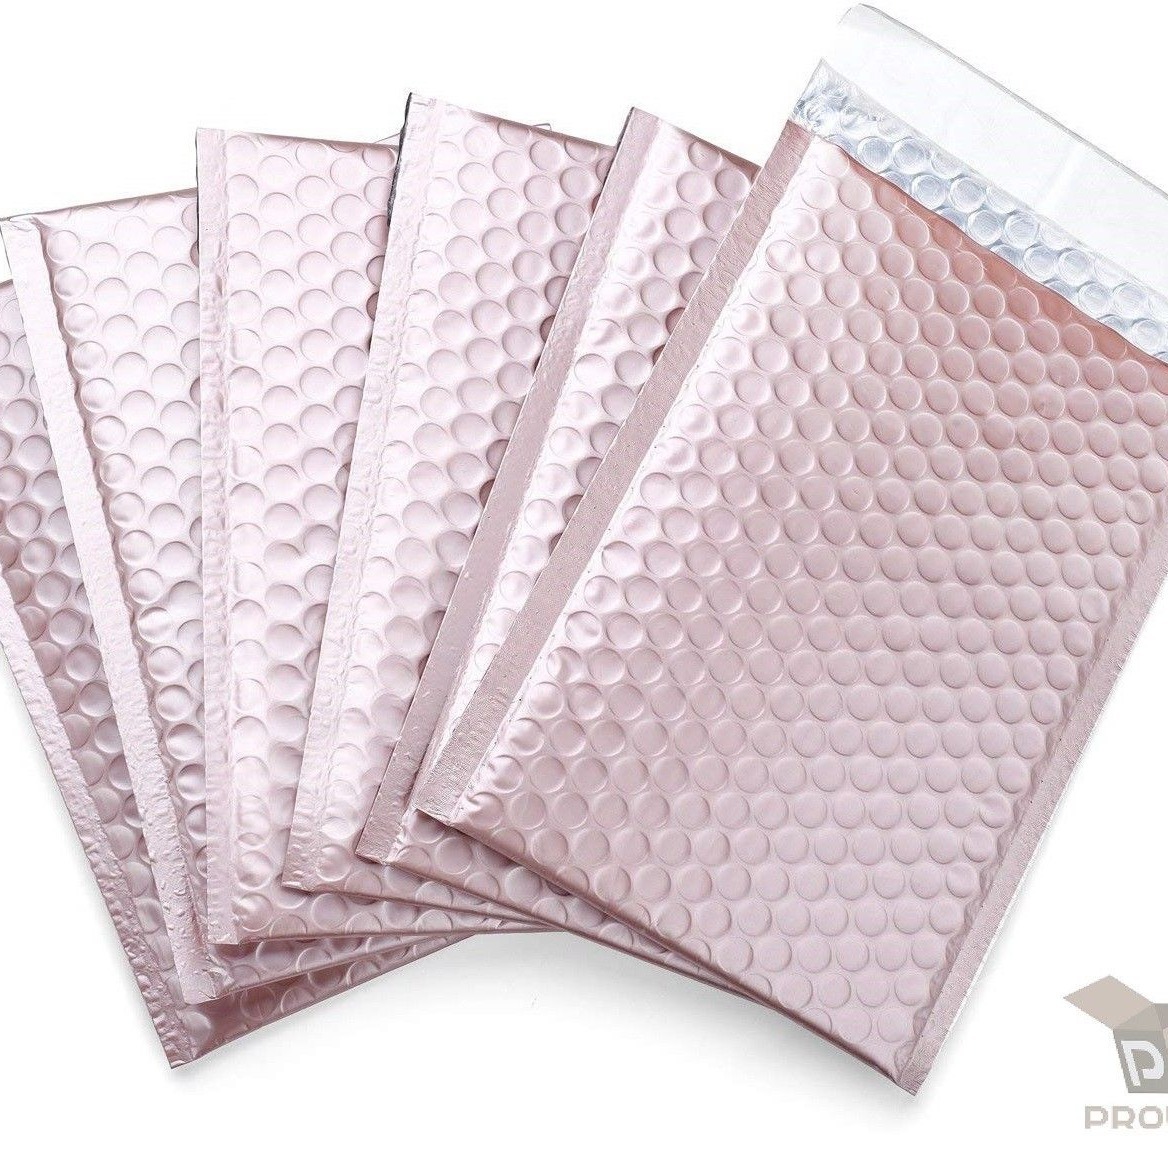 

Proline Matte Metallic Rose Gold Bubble Padded Envelopes Self-sealing Mailers Extra Wide 6.5x10 (inner 6.5x9)